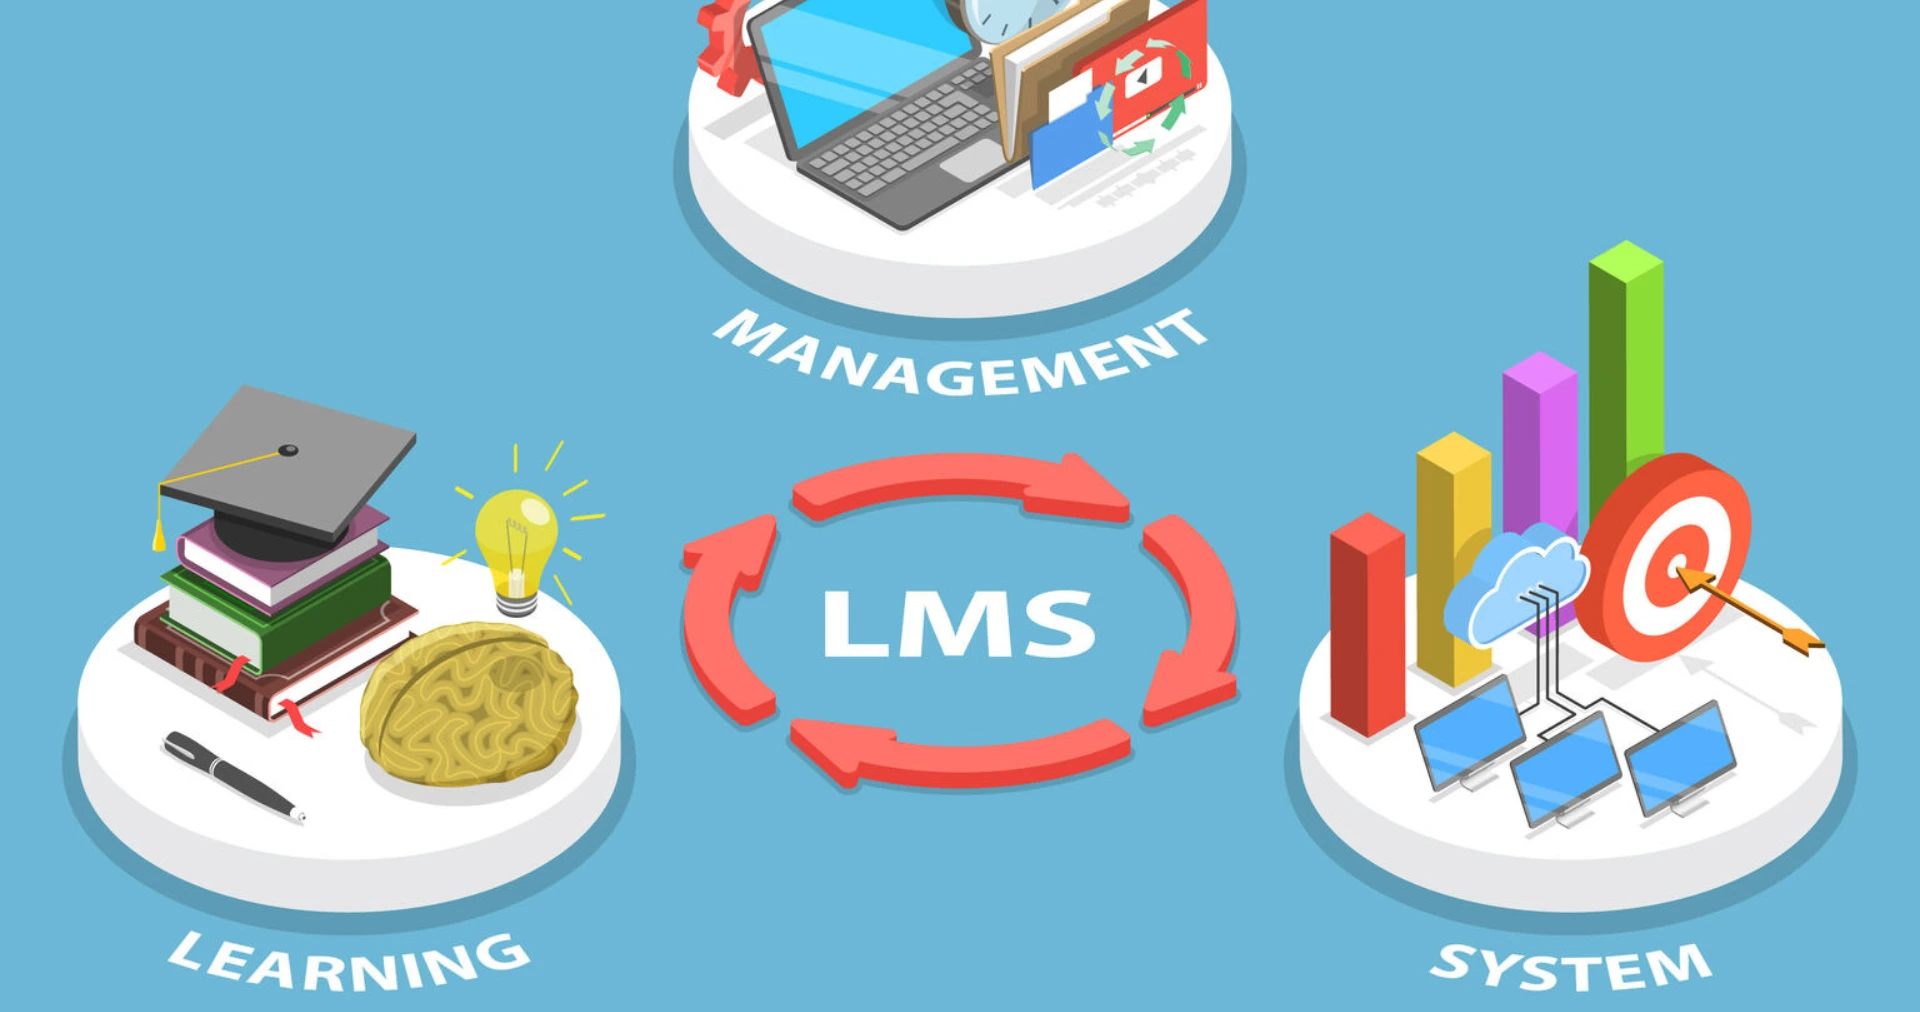 What is a Learning Management System?